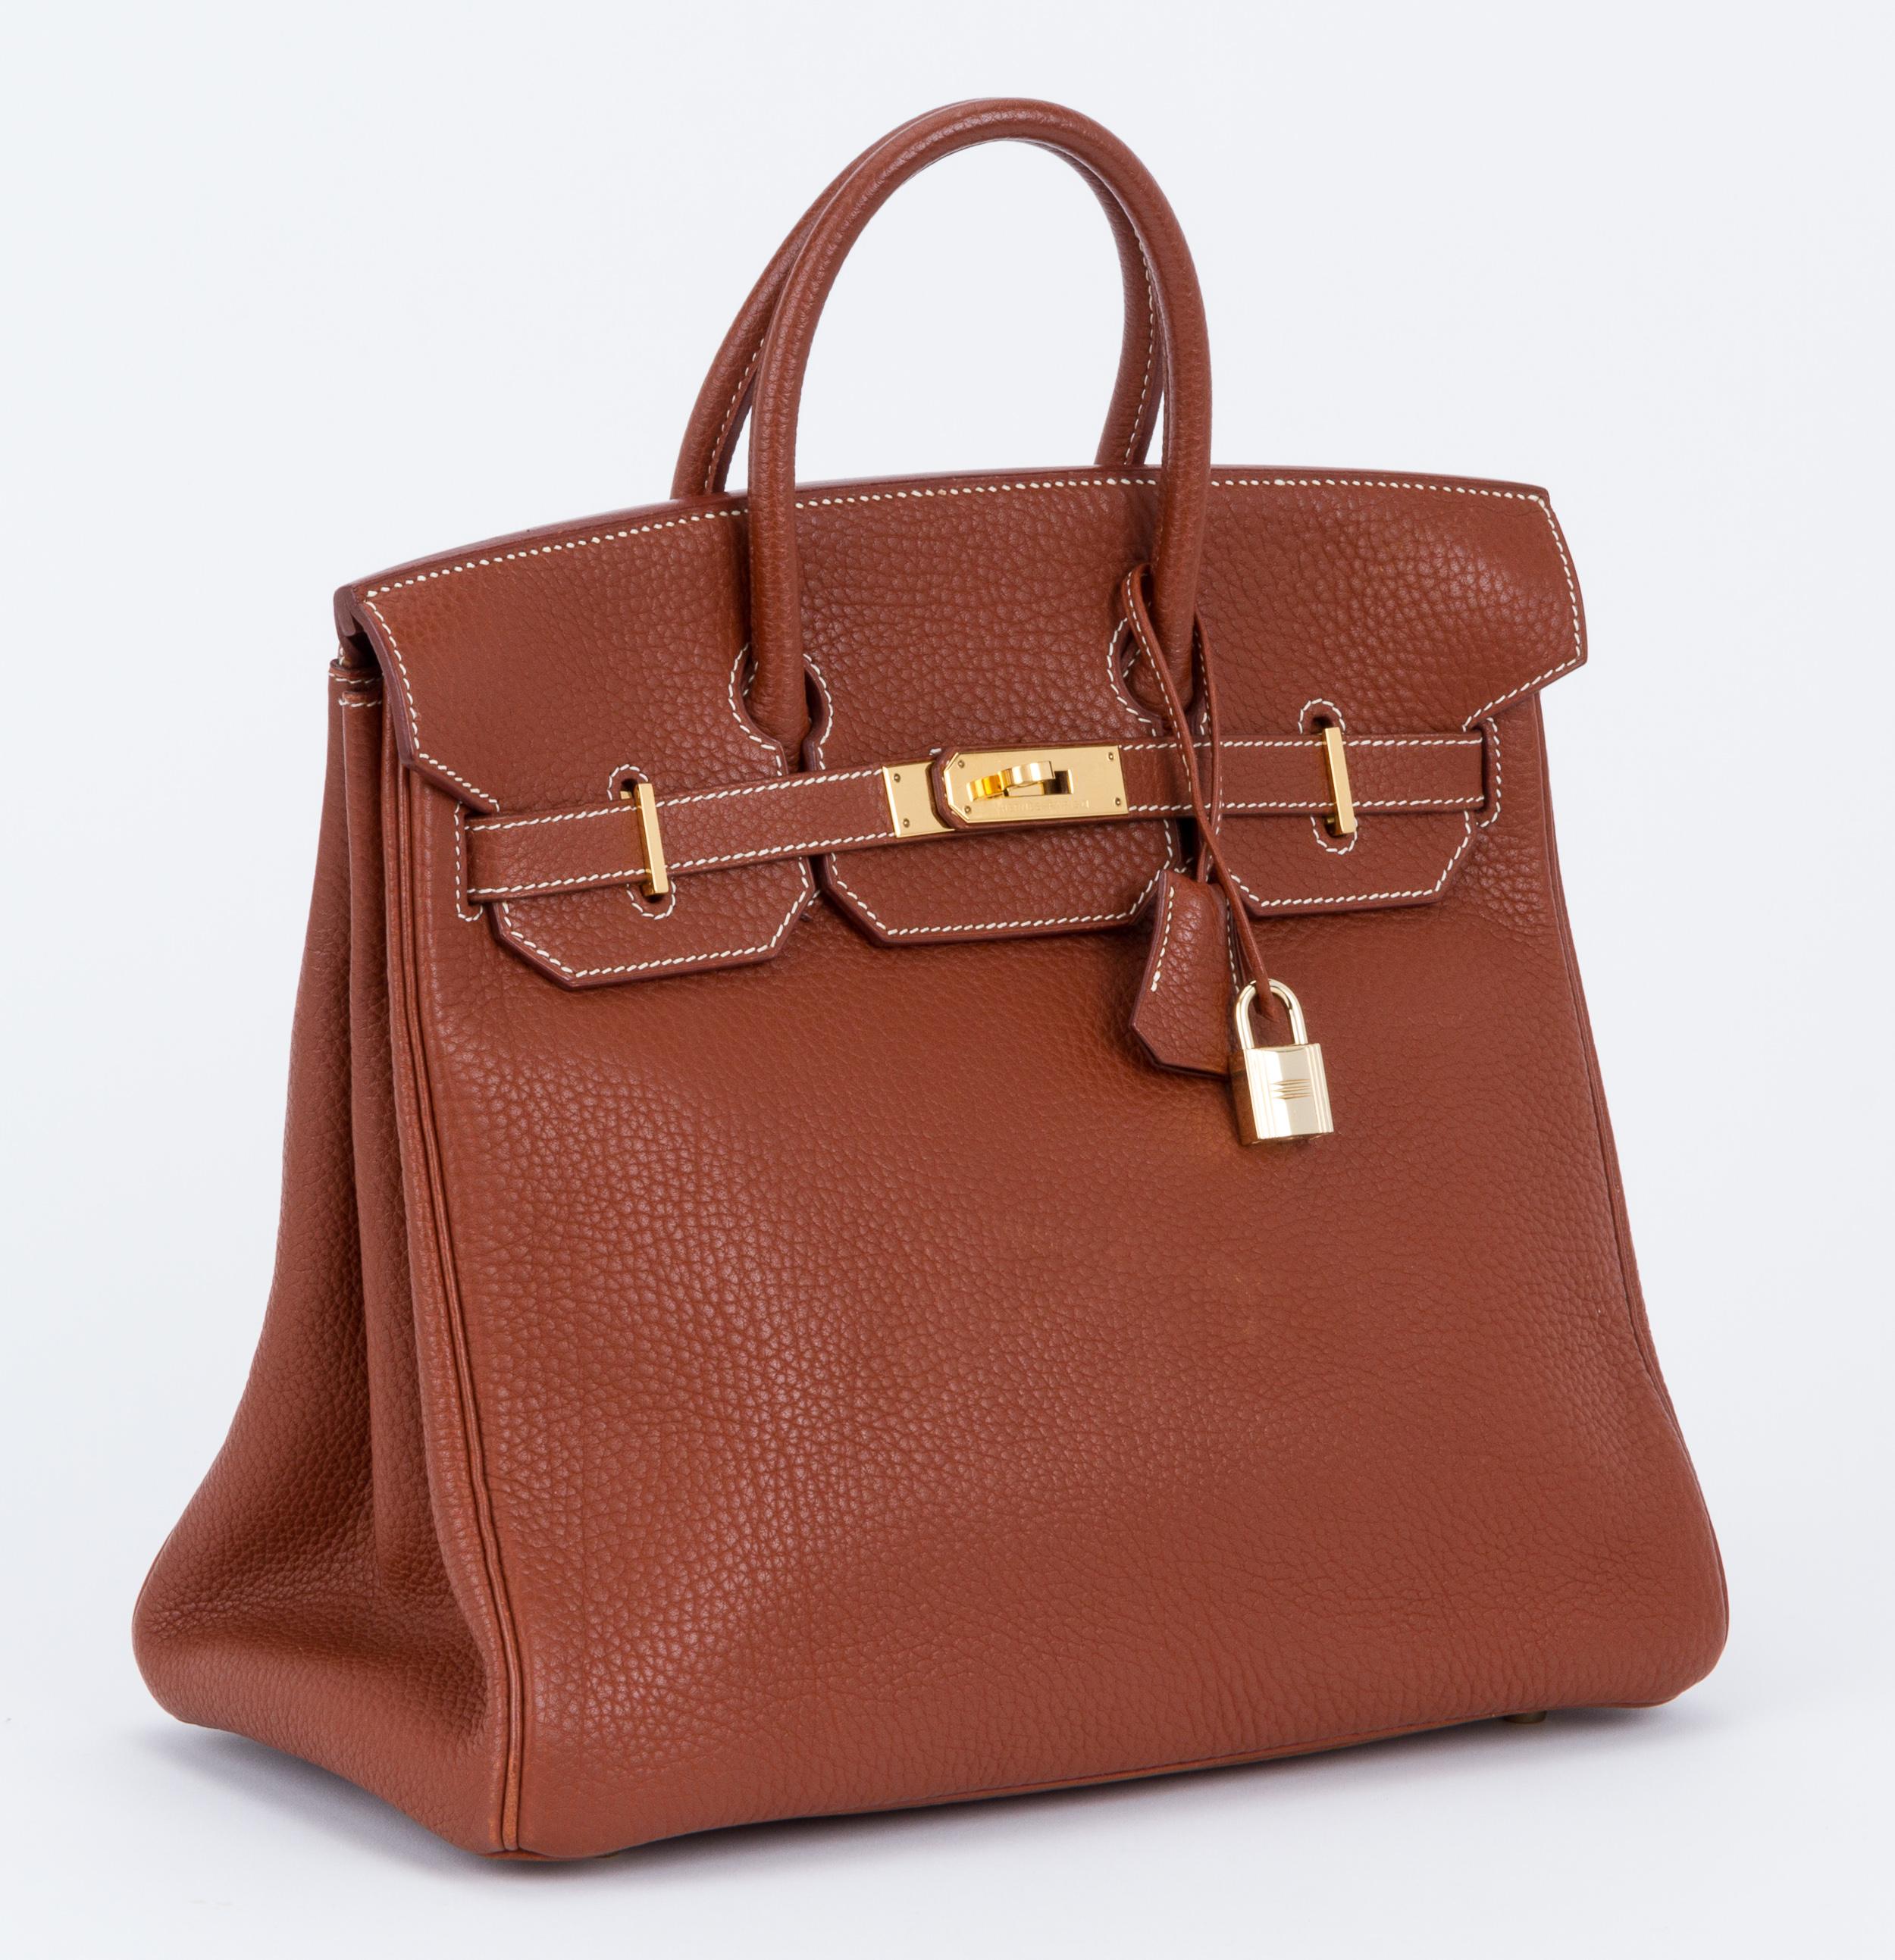 Hermes Birkin HAC 32cm in fauve fjord leather and gold tone hardware. Date stamp E for 2001. Minor wear on corners, please refer to photos. Comes with clochette, tirette, lock , 2 keys and original dust cover.